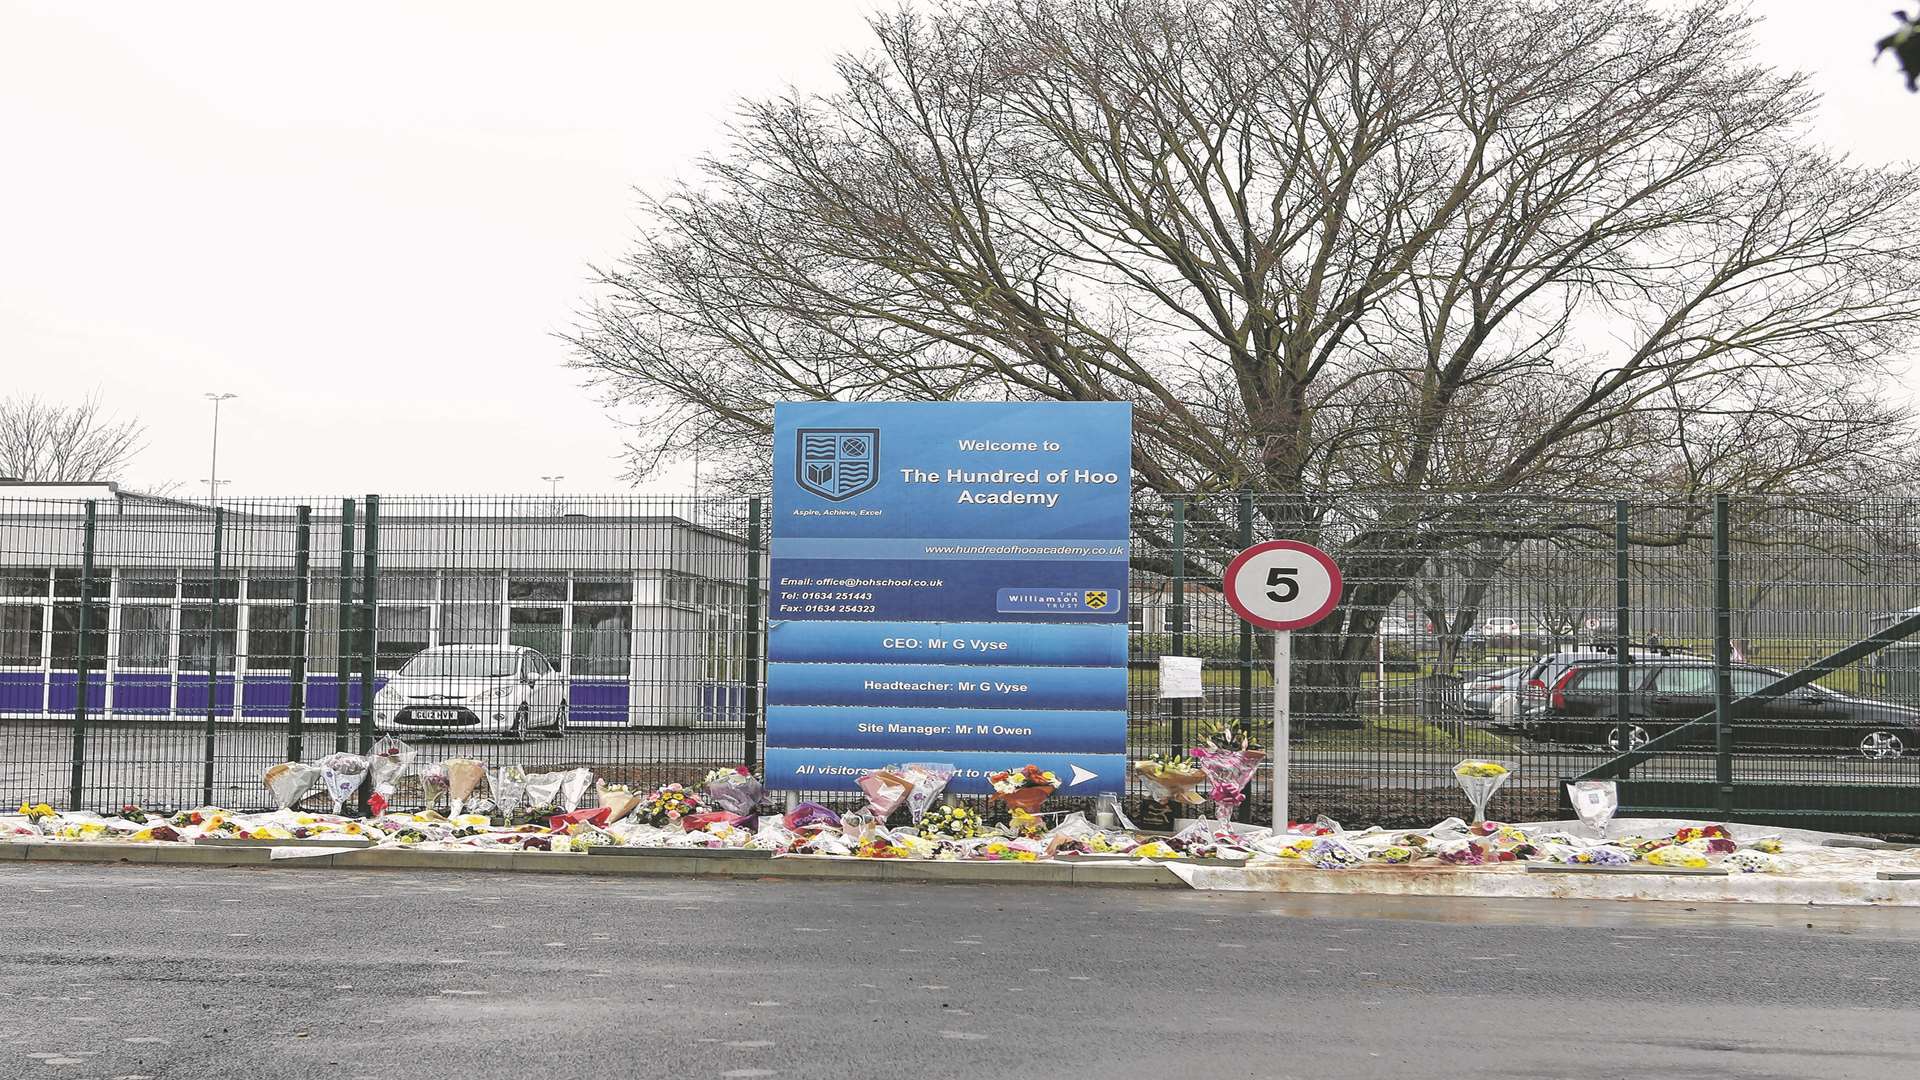 Students left flowers at the school when they returned after half term